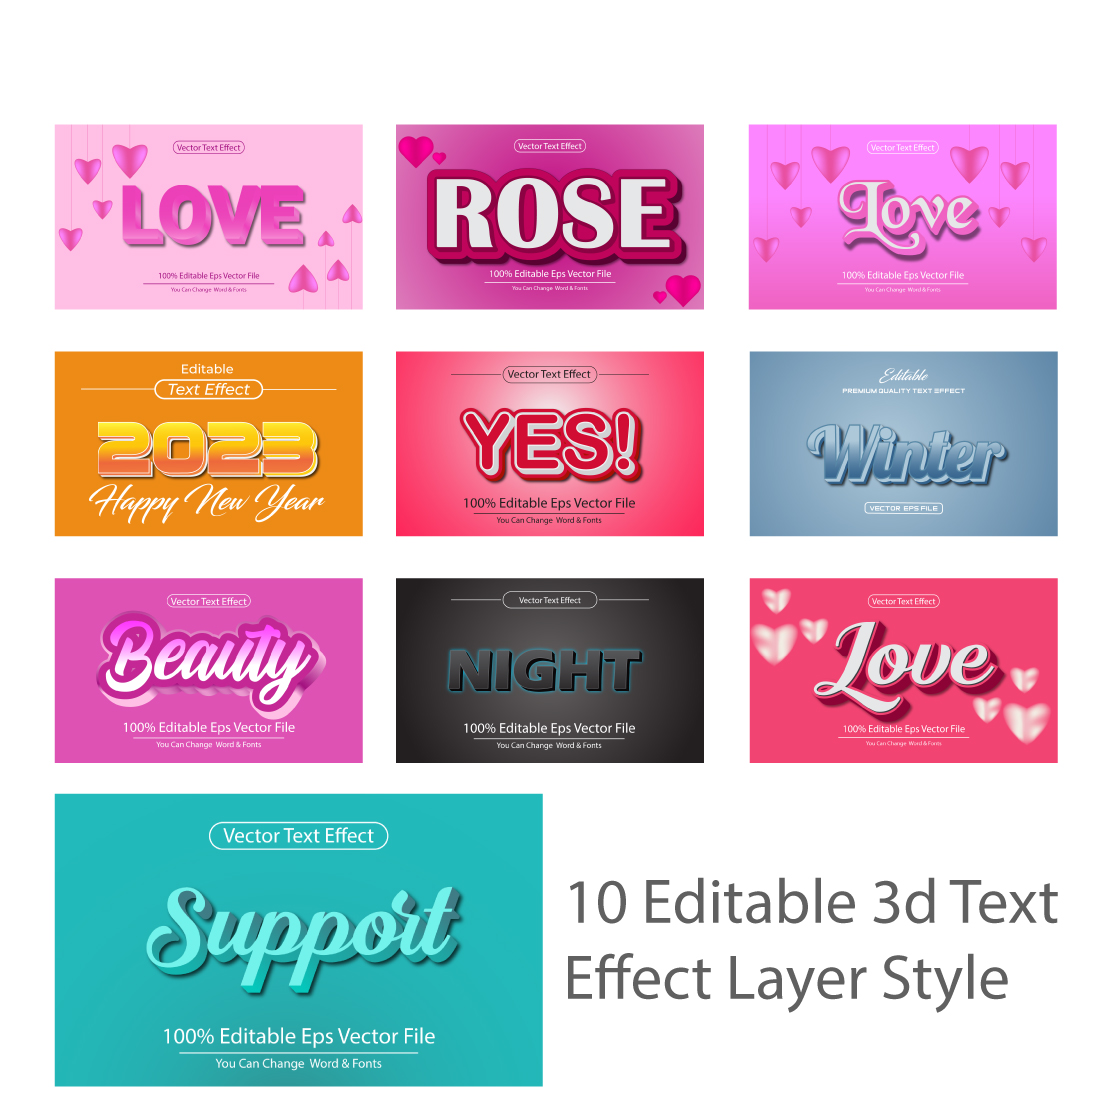 10 Editable 3D Text Effect Layer Style main image.